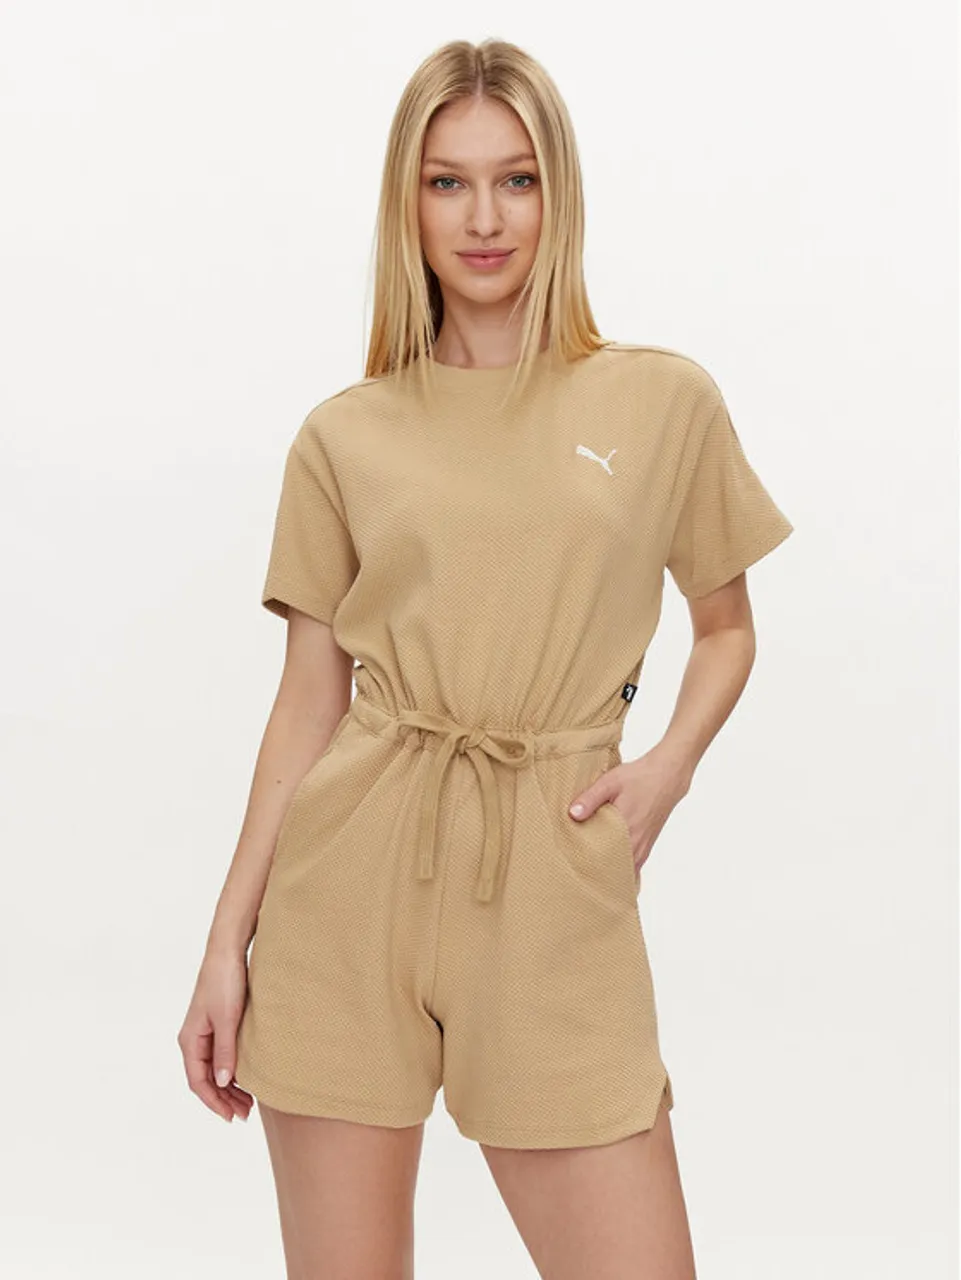 Puma Overall HER 677891 Beige Relaxed Fit